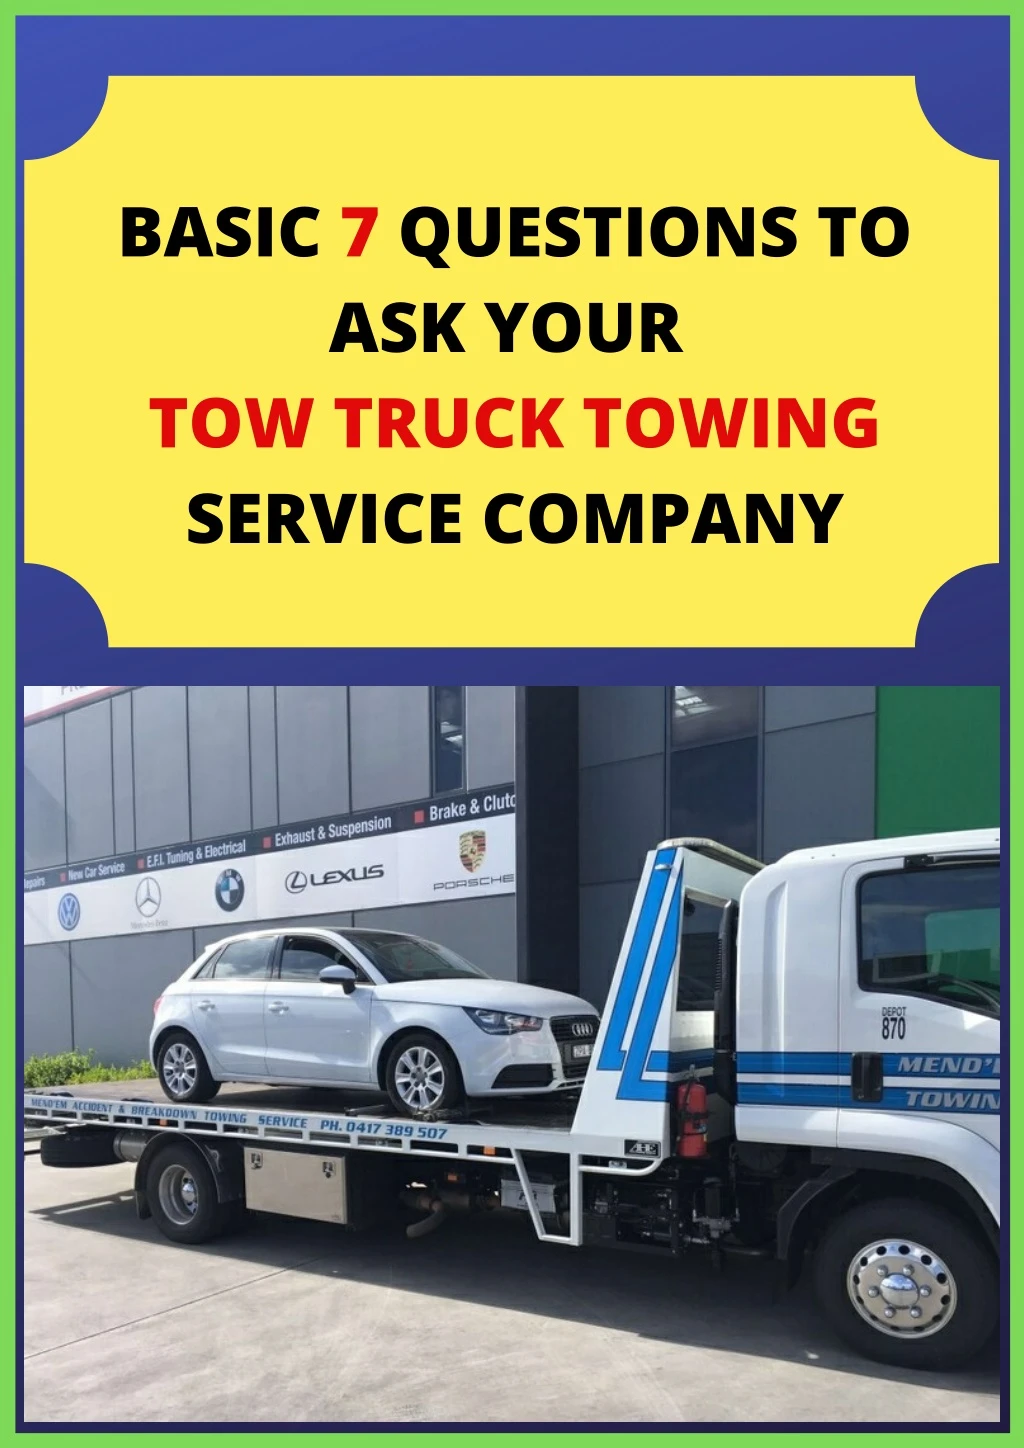 basic 7 questions to ask your tow truck towing